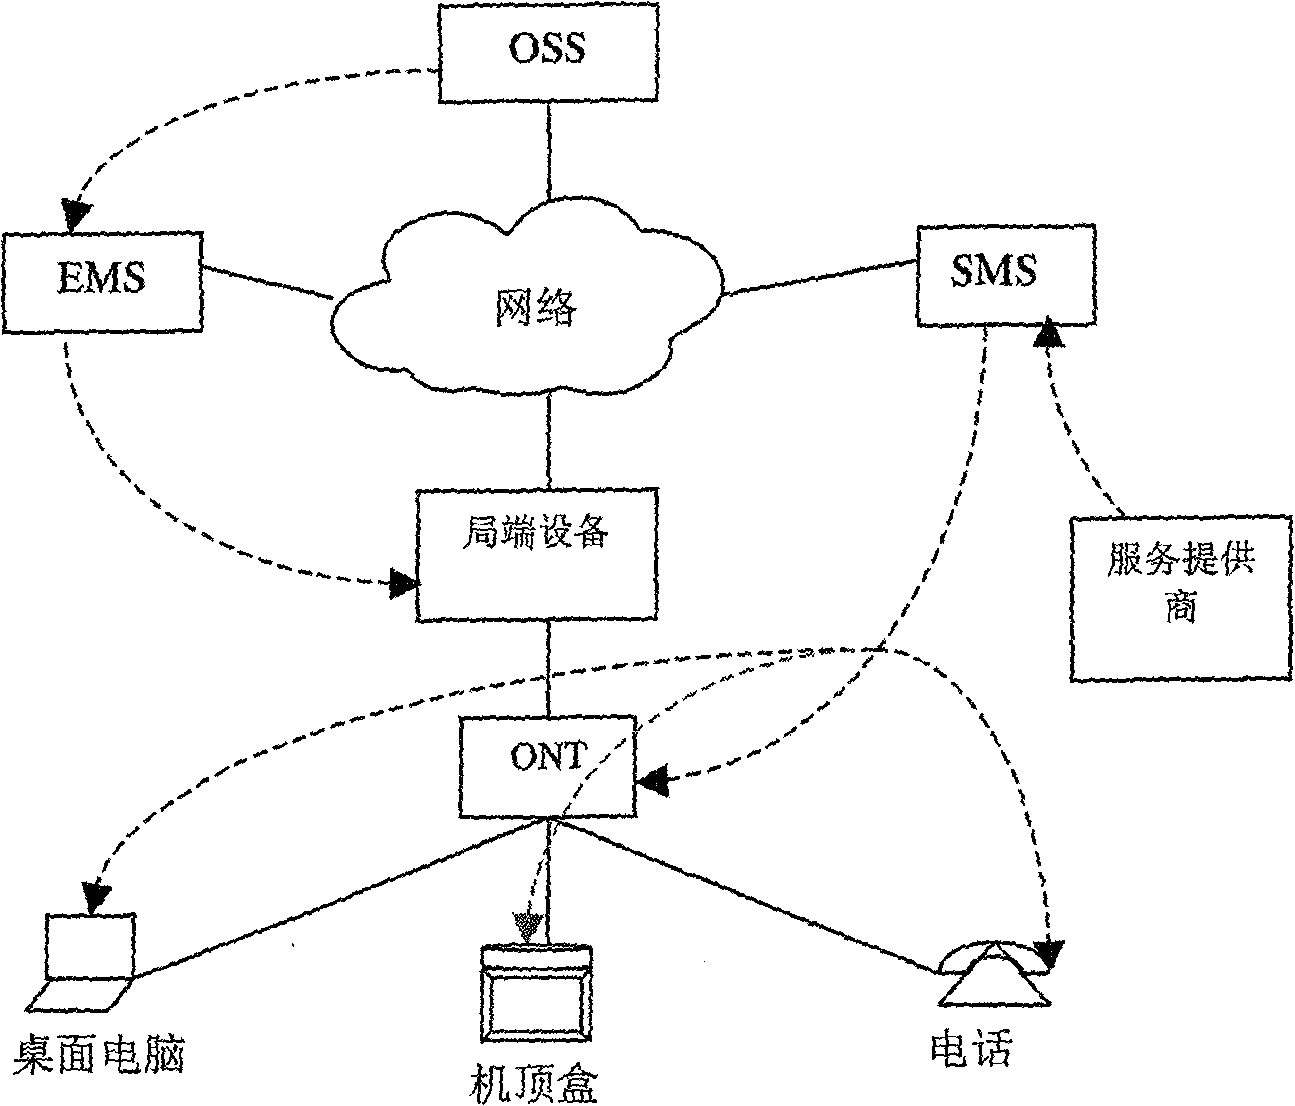 Method for realizing separation of communication network and terminal service with network